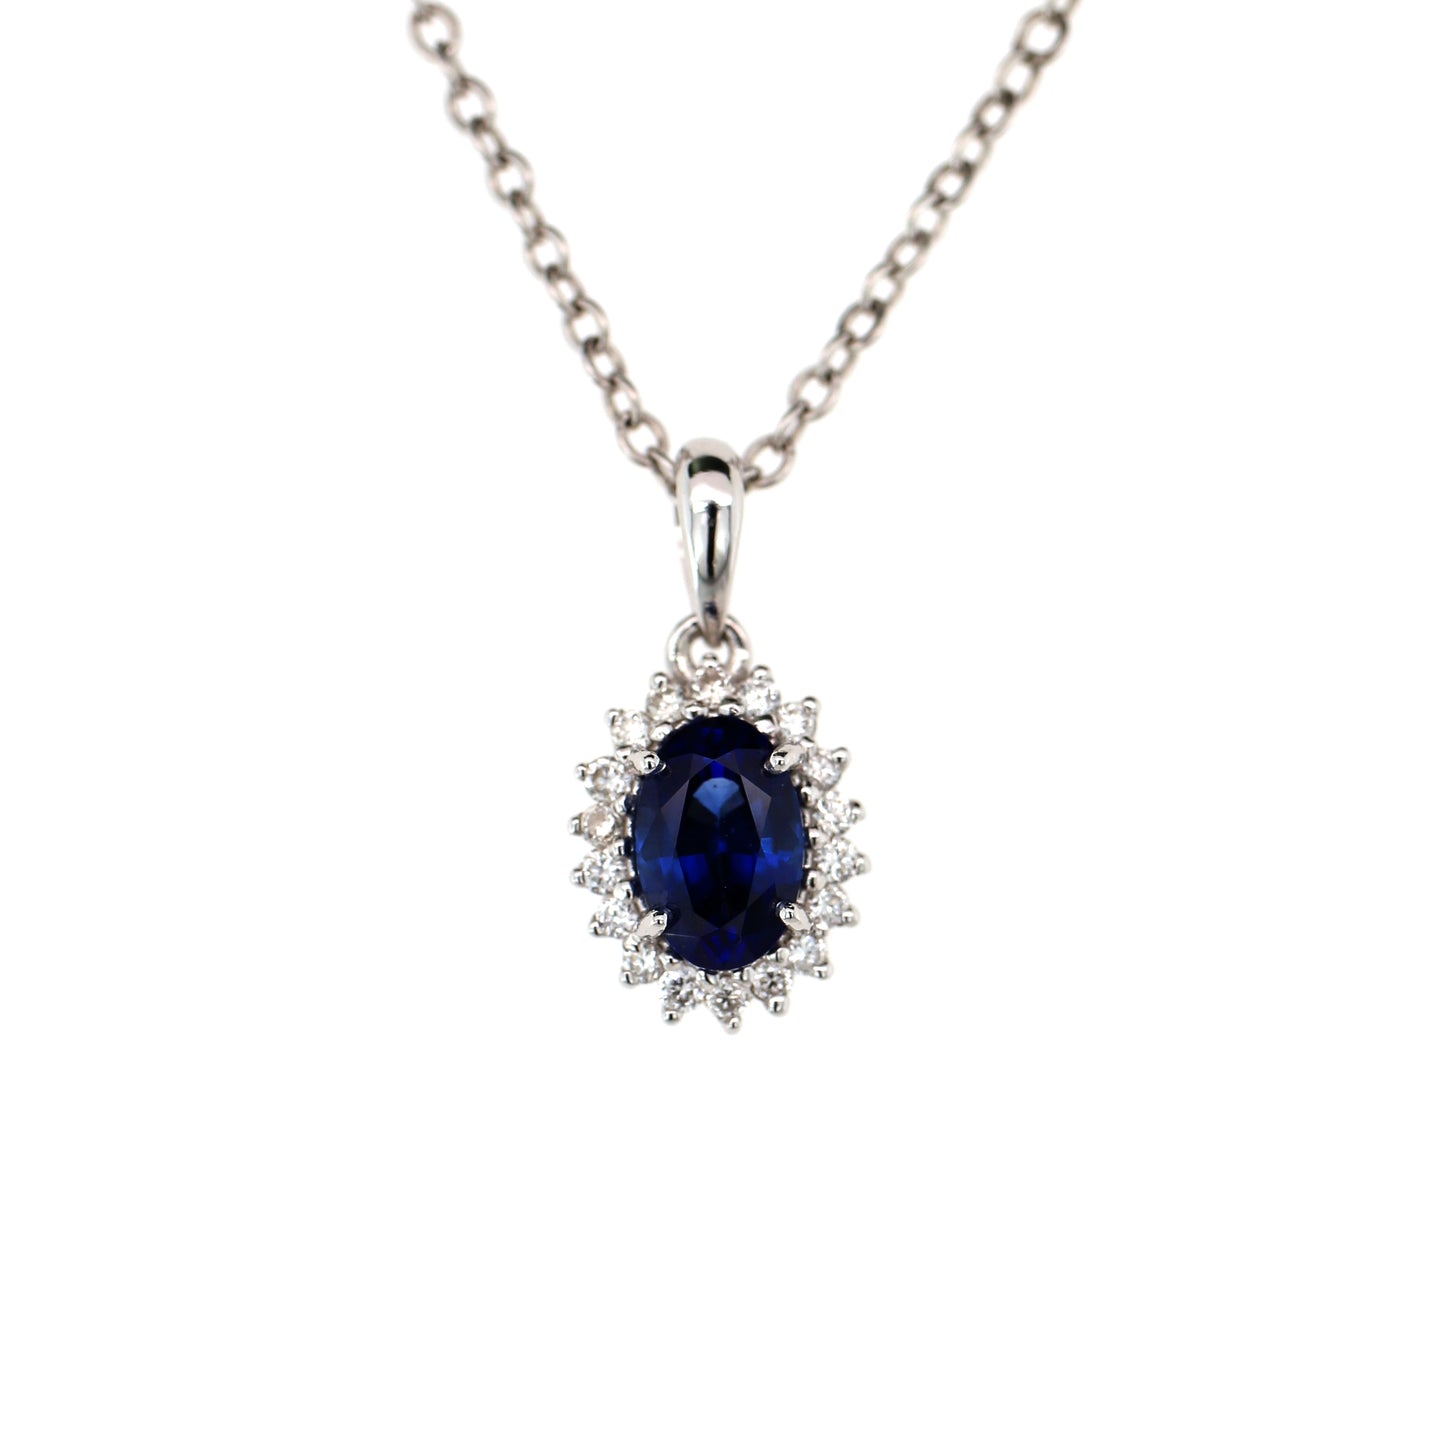 Stunning Magnificent Peice of Pendant Elaborated with Blue Sapphire Beauty is enhanced by addition of White Diamond